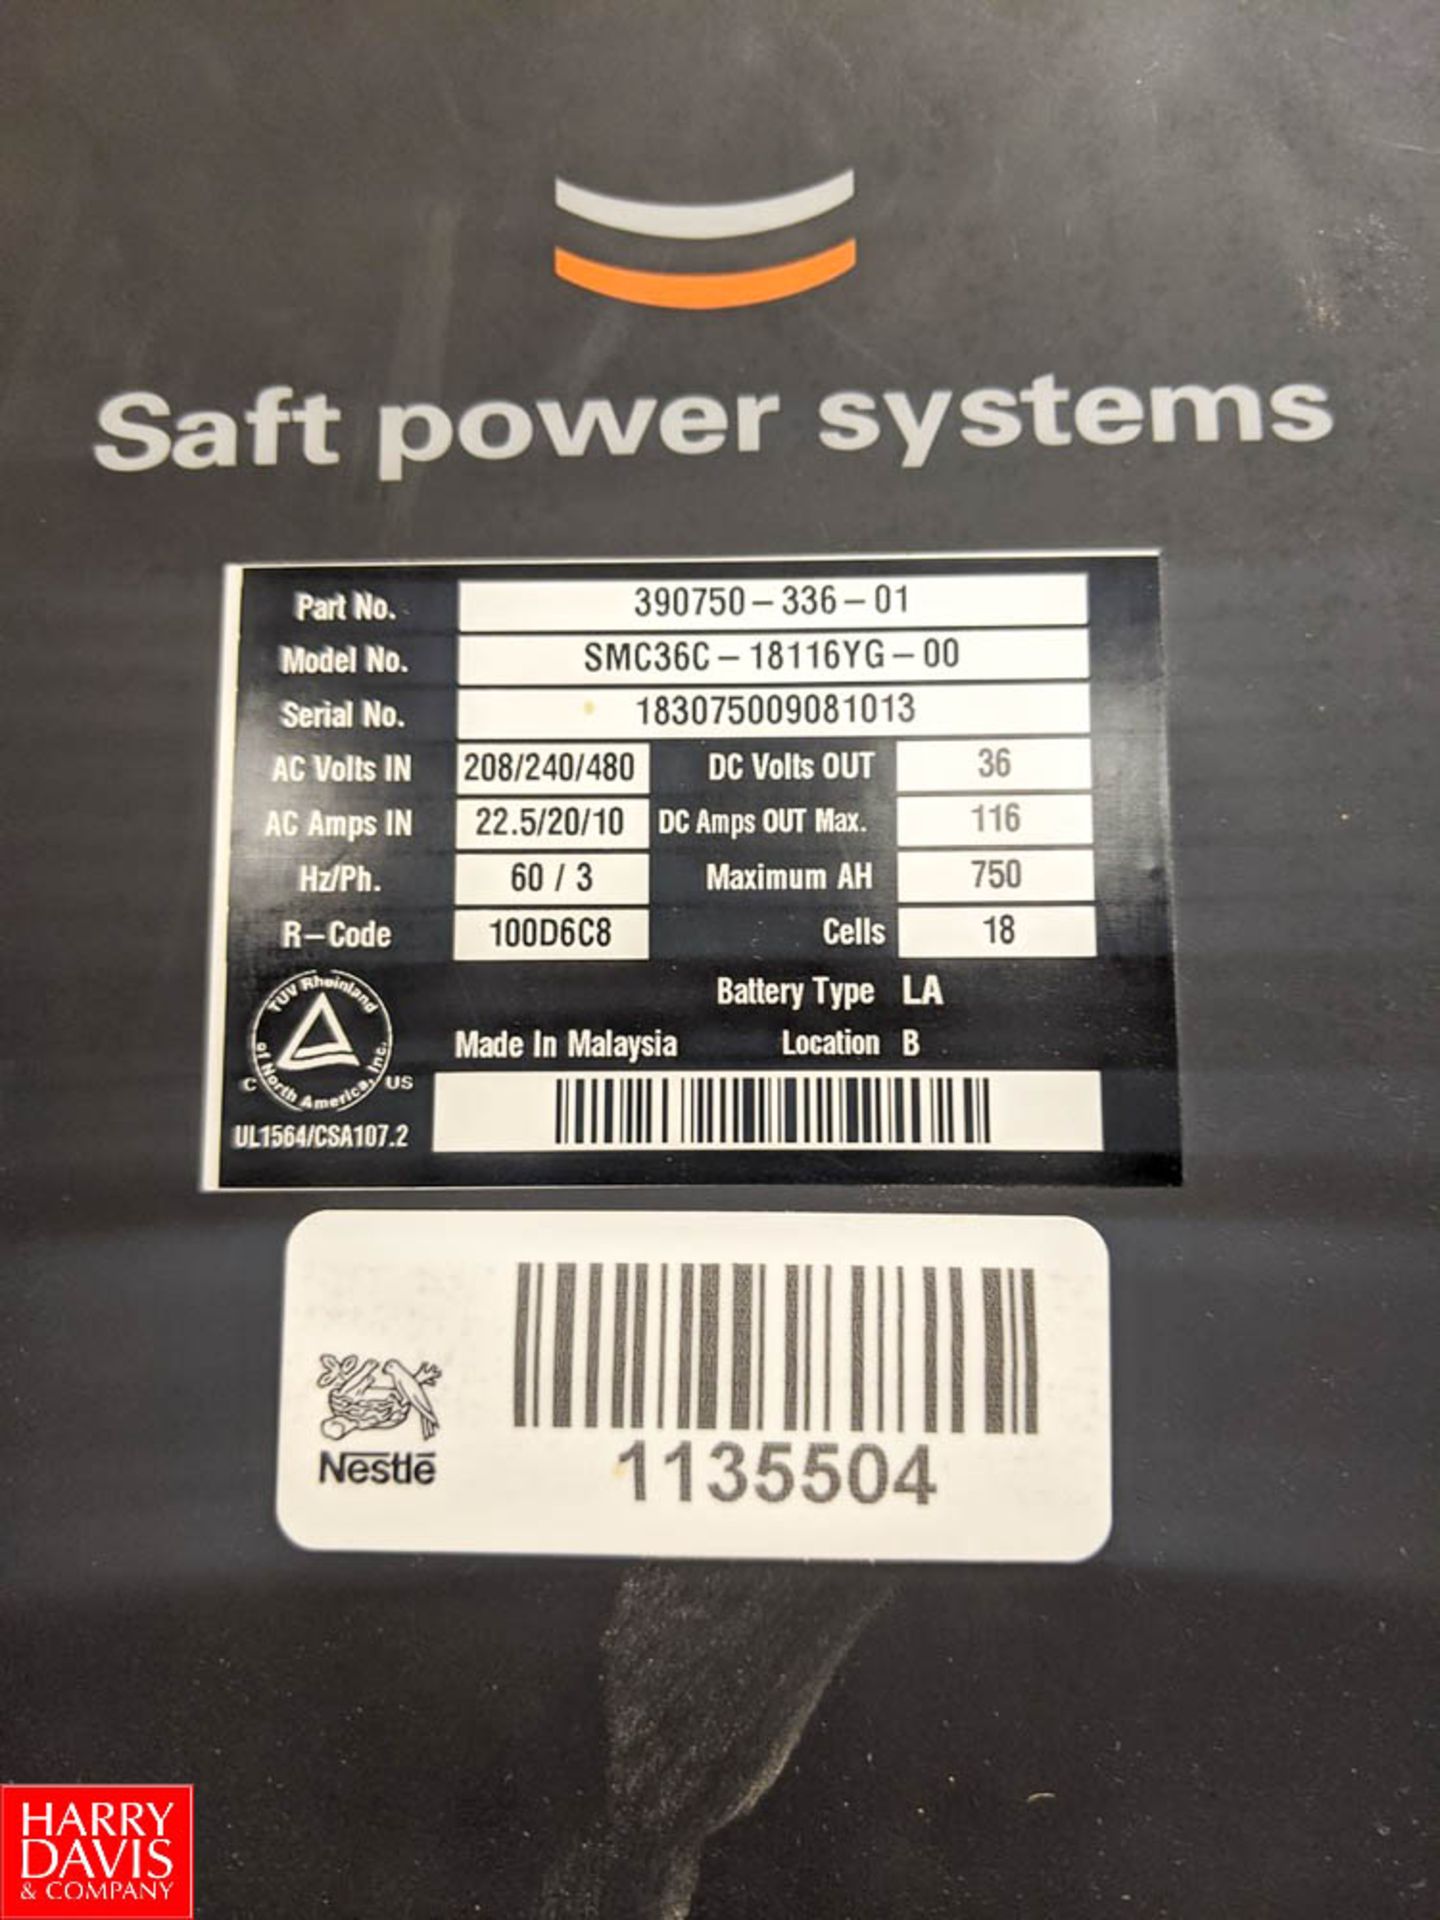 Saft Power Systems 36 Volt Battery Charger Model SMC36C-18116YG-00 Rigging Fee: $75 - Image 2 of 2